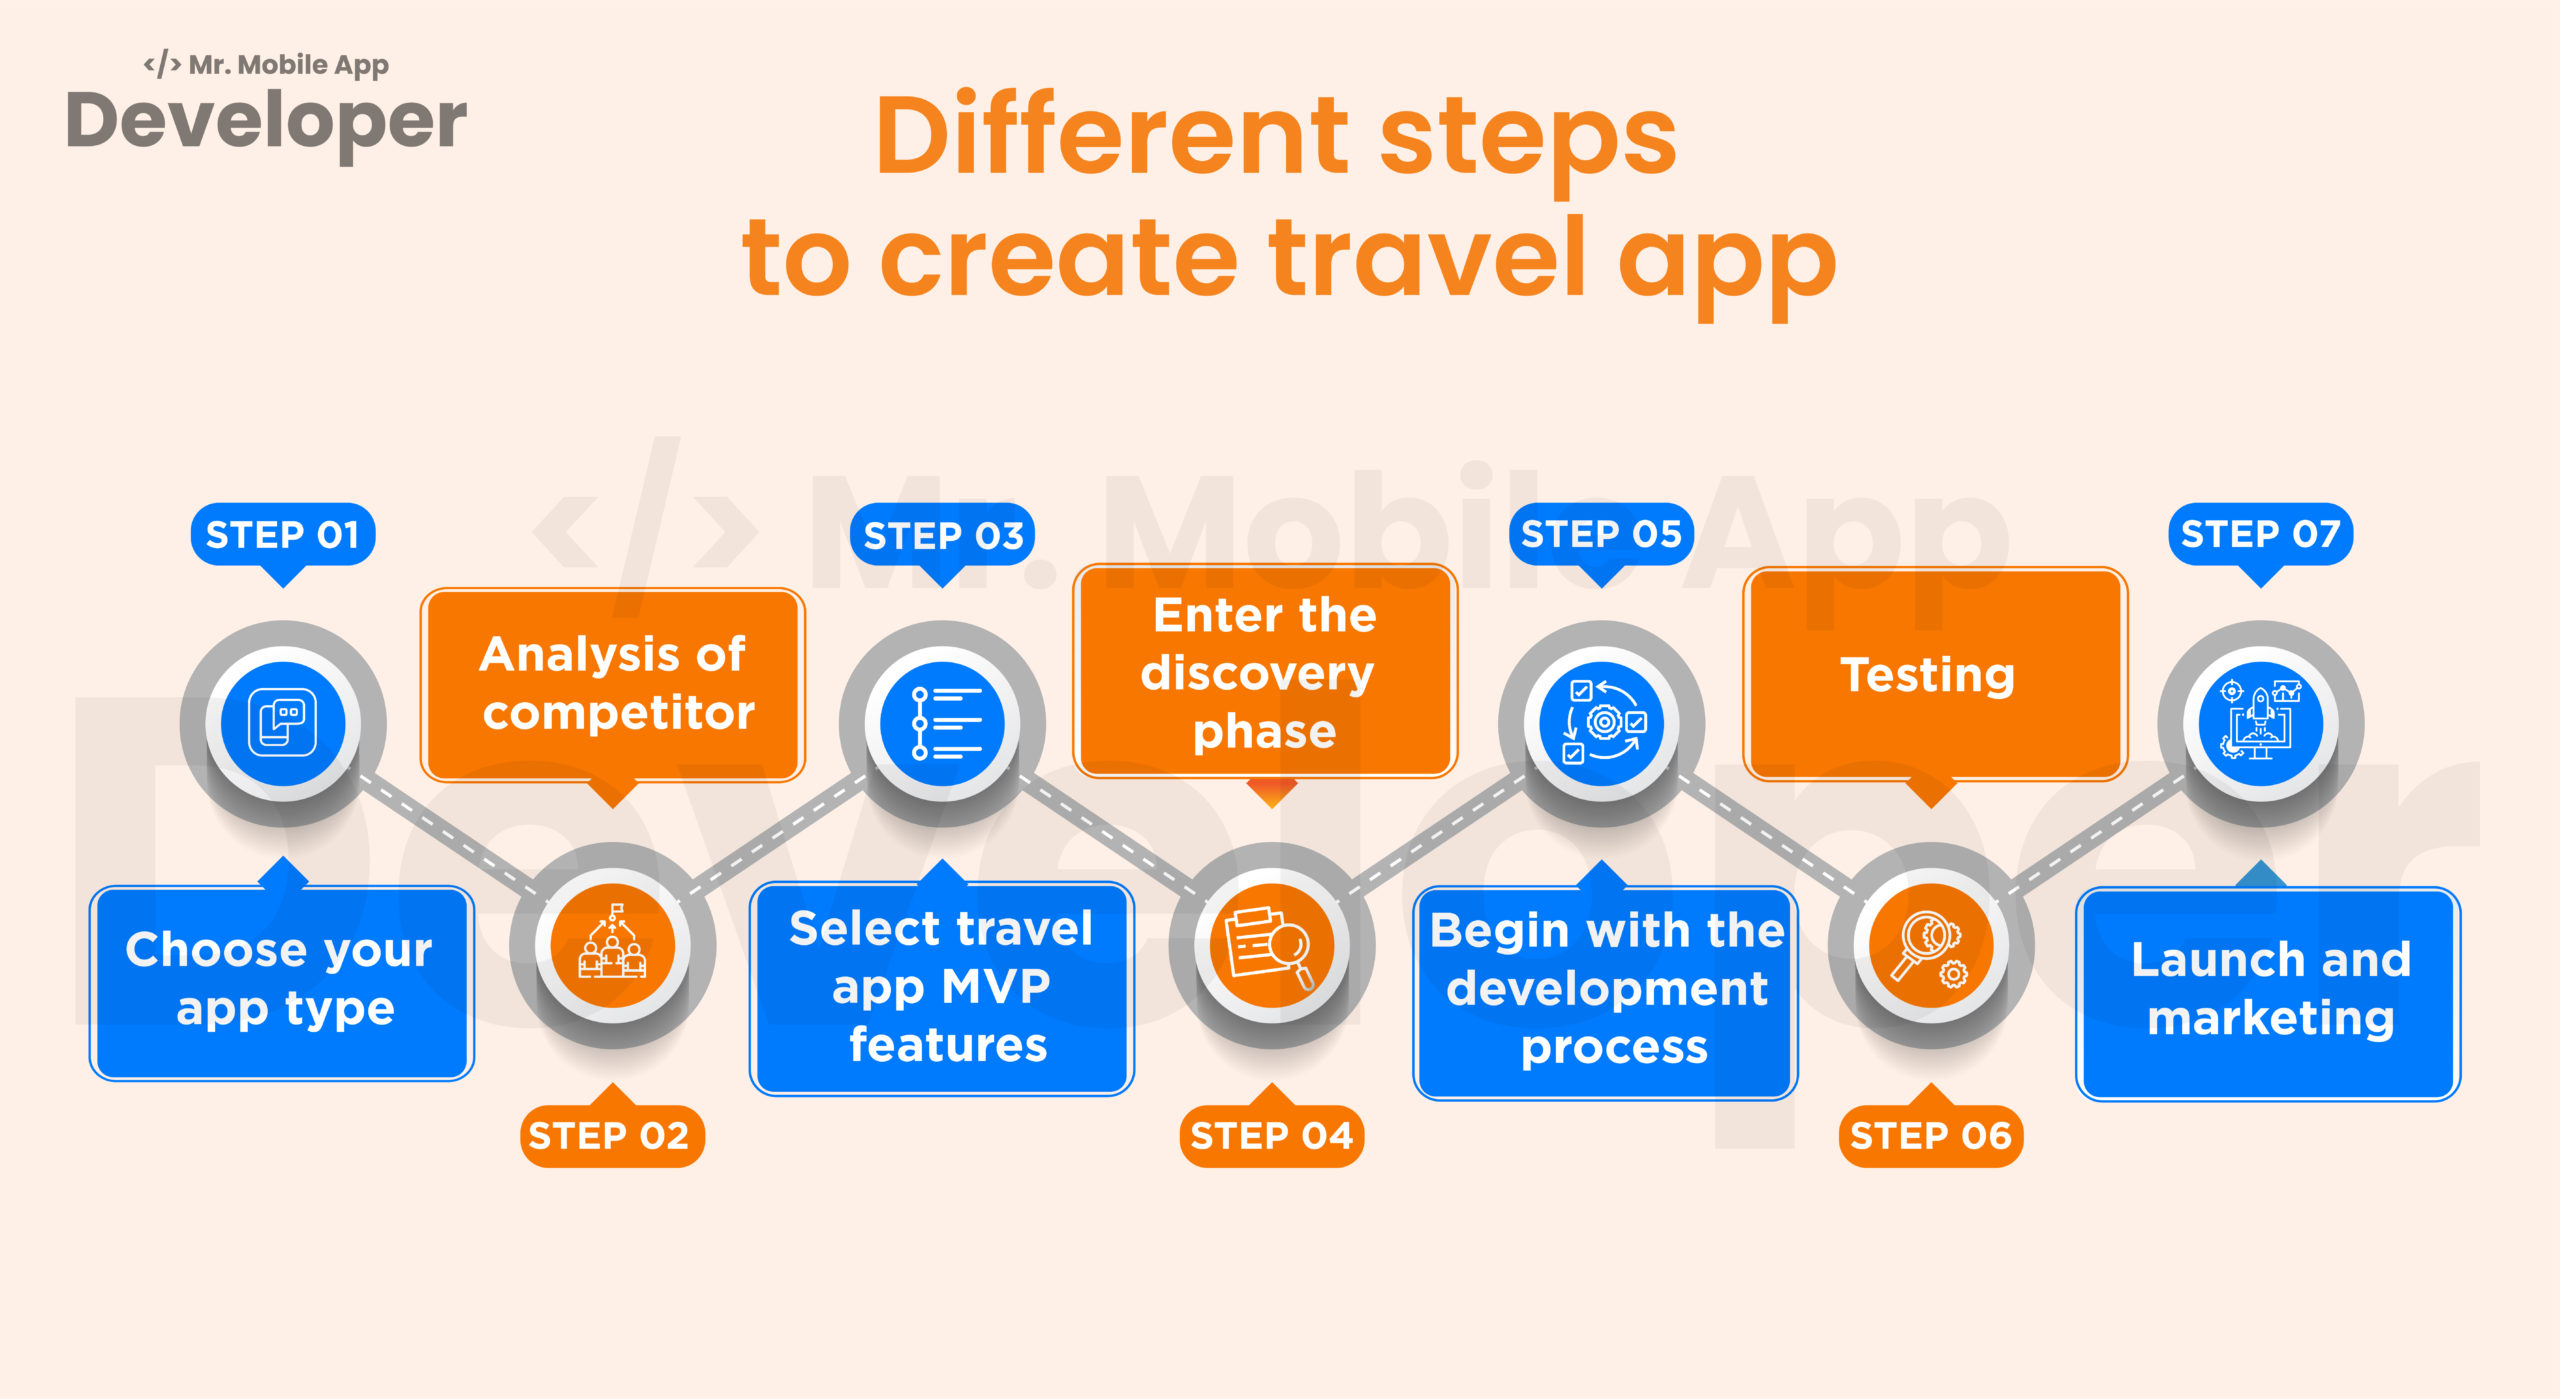 Different steps to create travel app